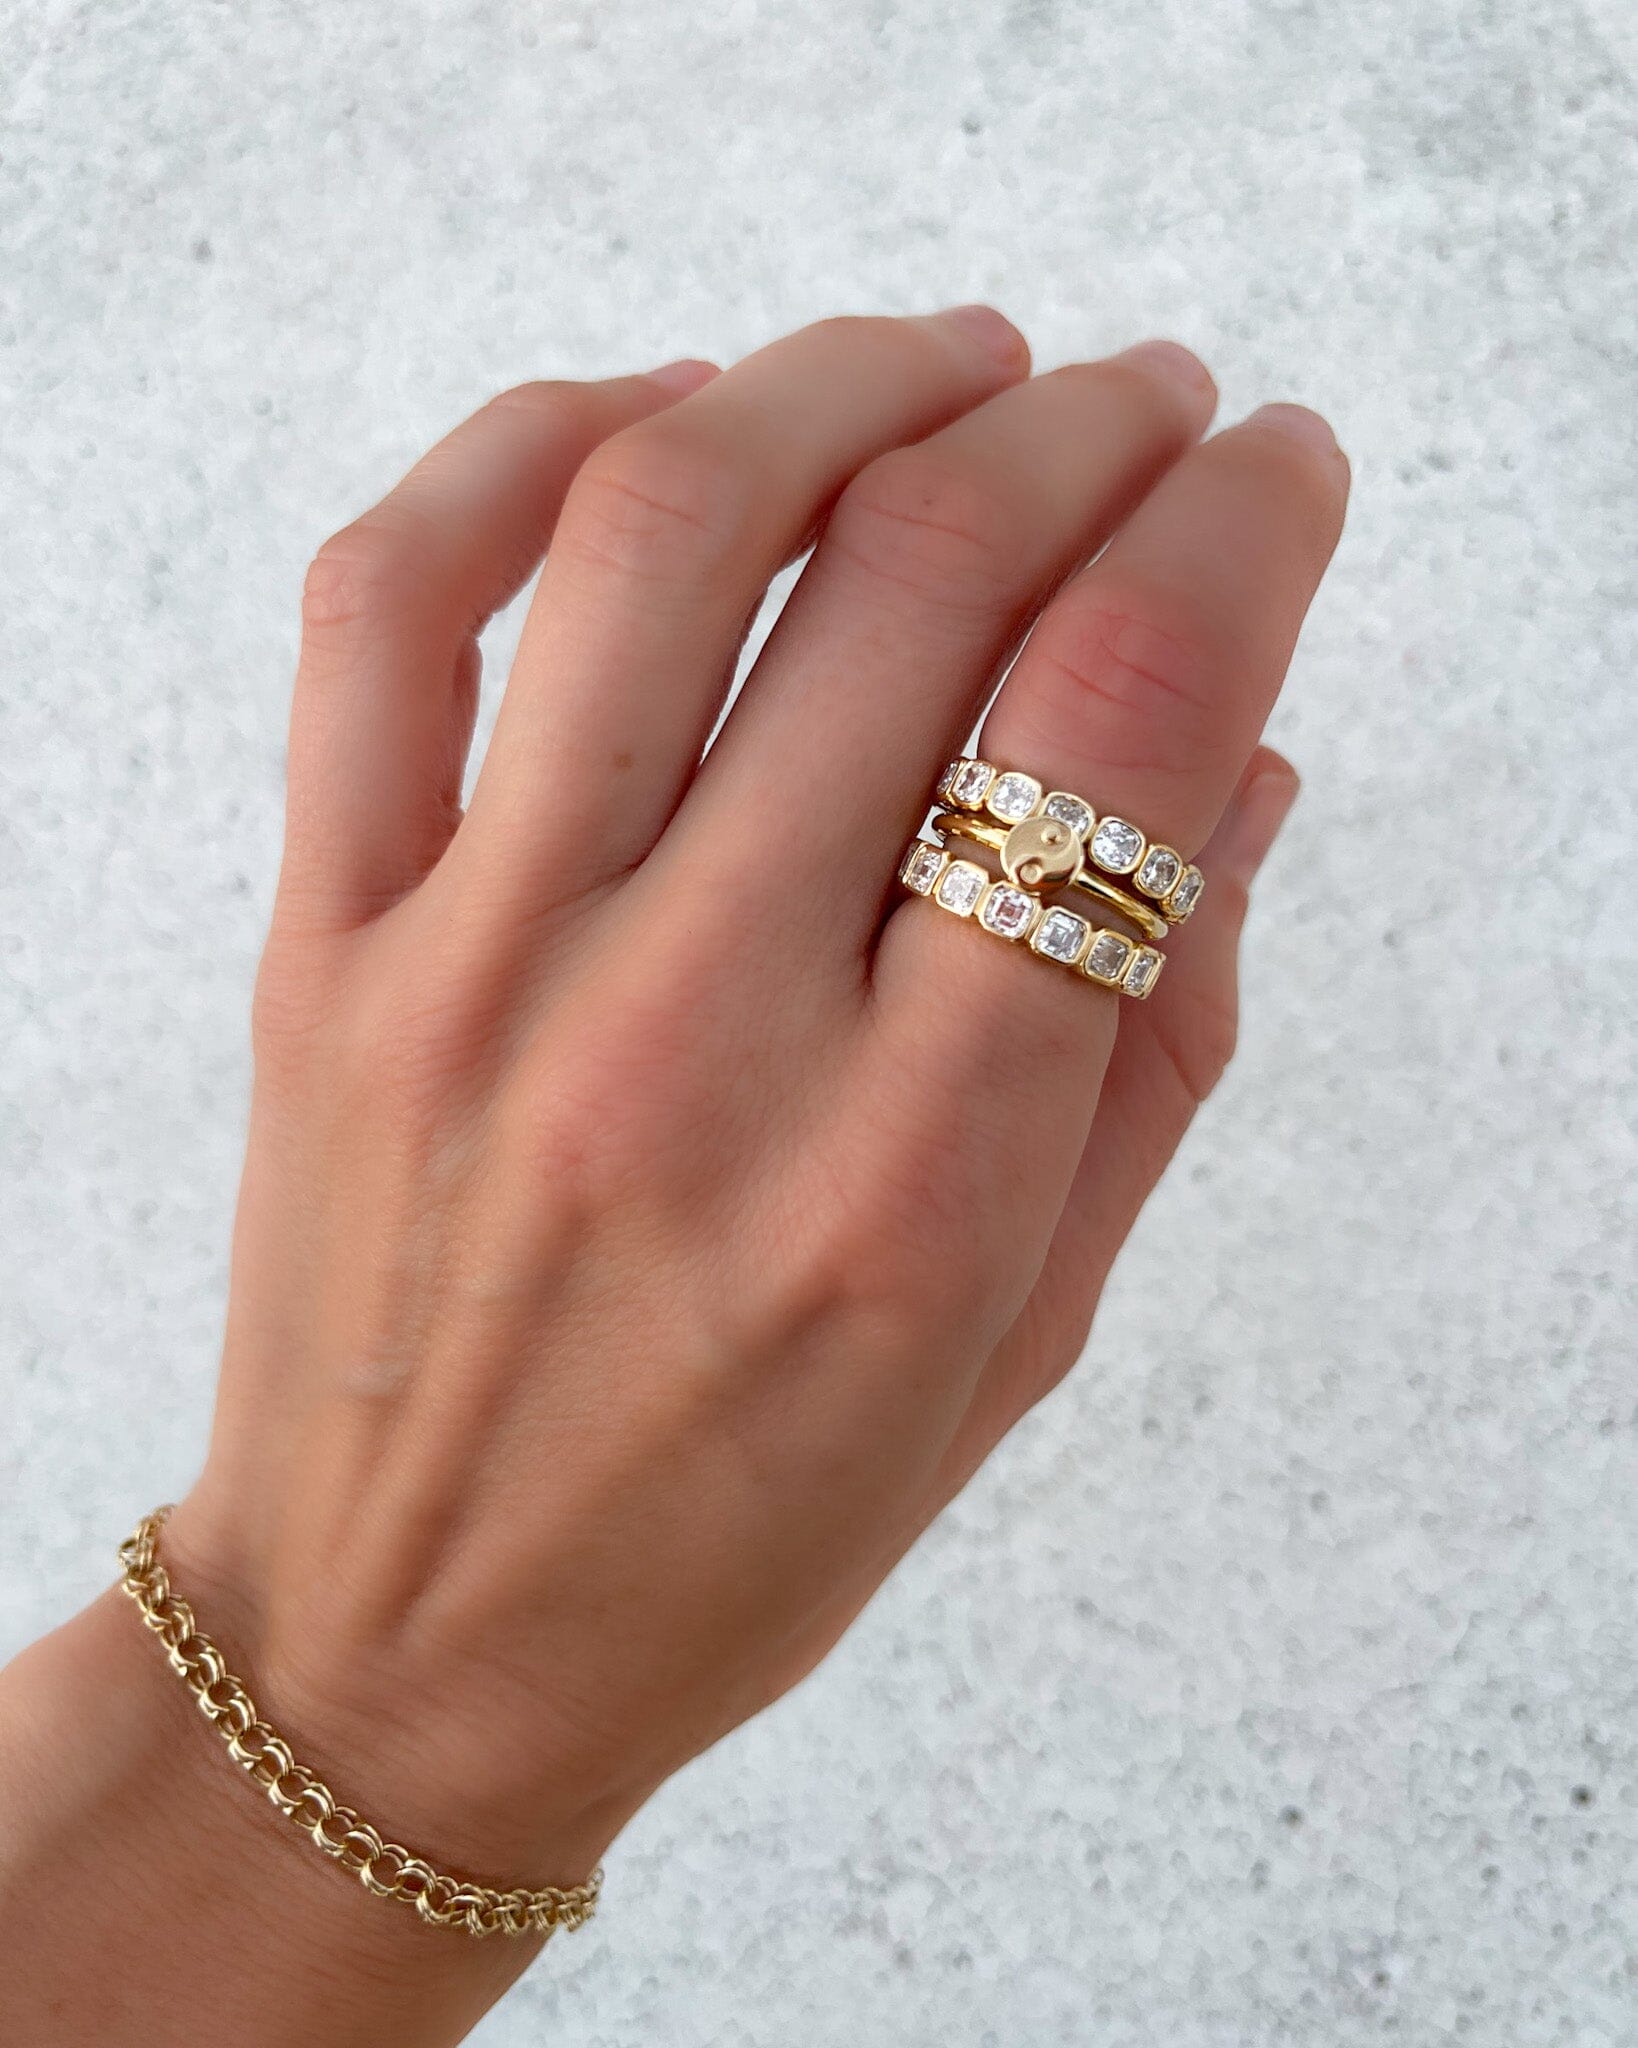 Midi Bezel Set Eternity Band With Asscher Cuts in Yellow Gold by Good Stone